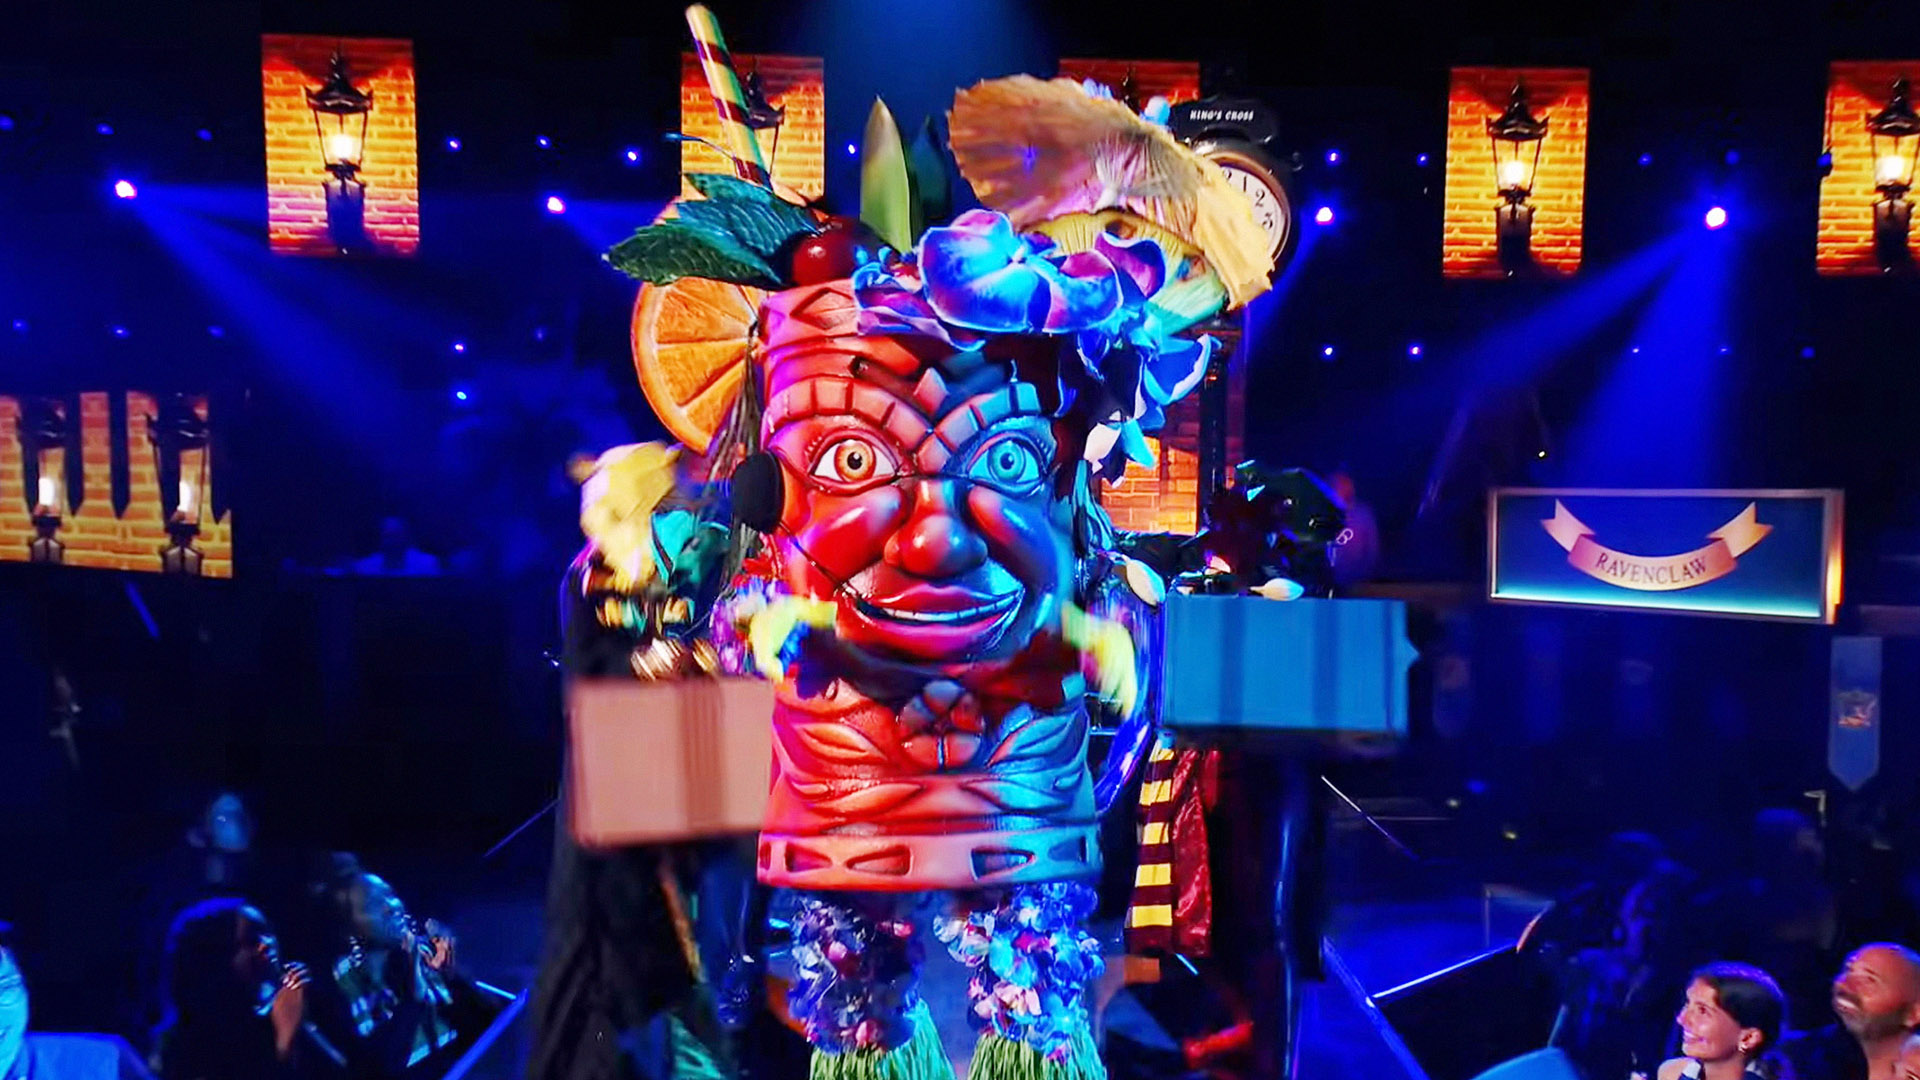 Our 5 Clues About Masked Singer's Tiki Identity (Spoiler: It's a Rock Star)